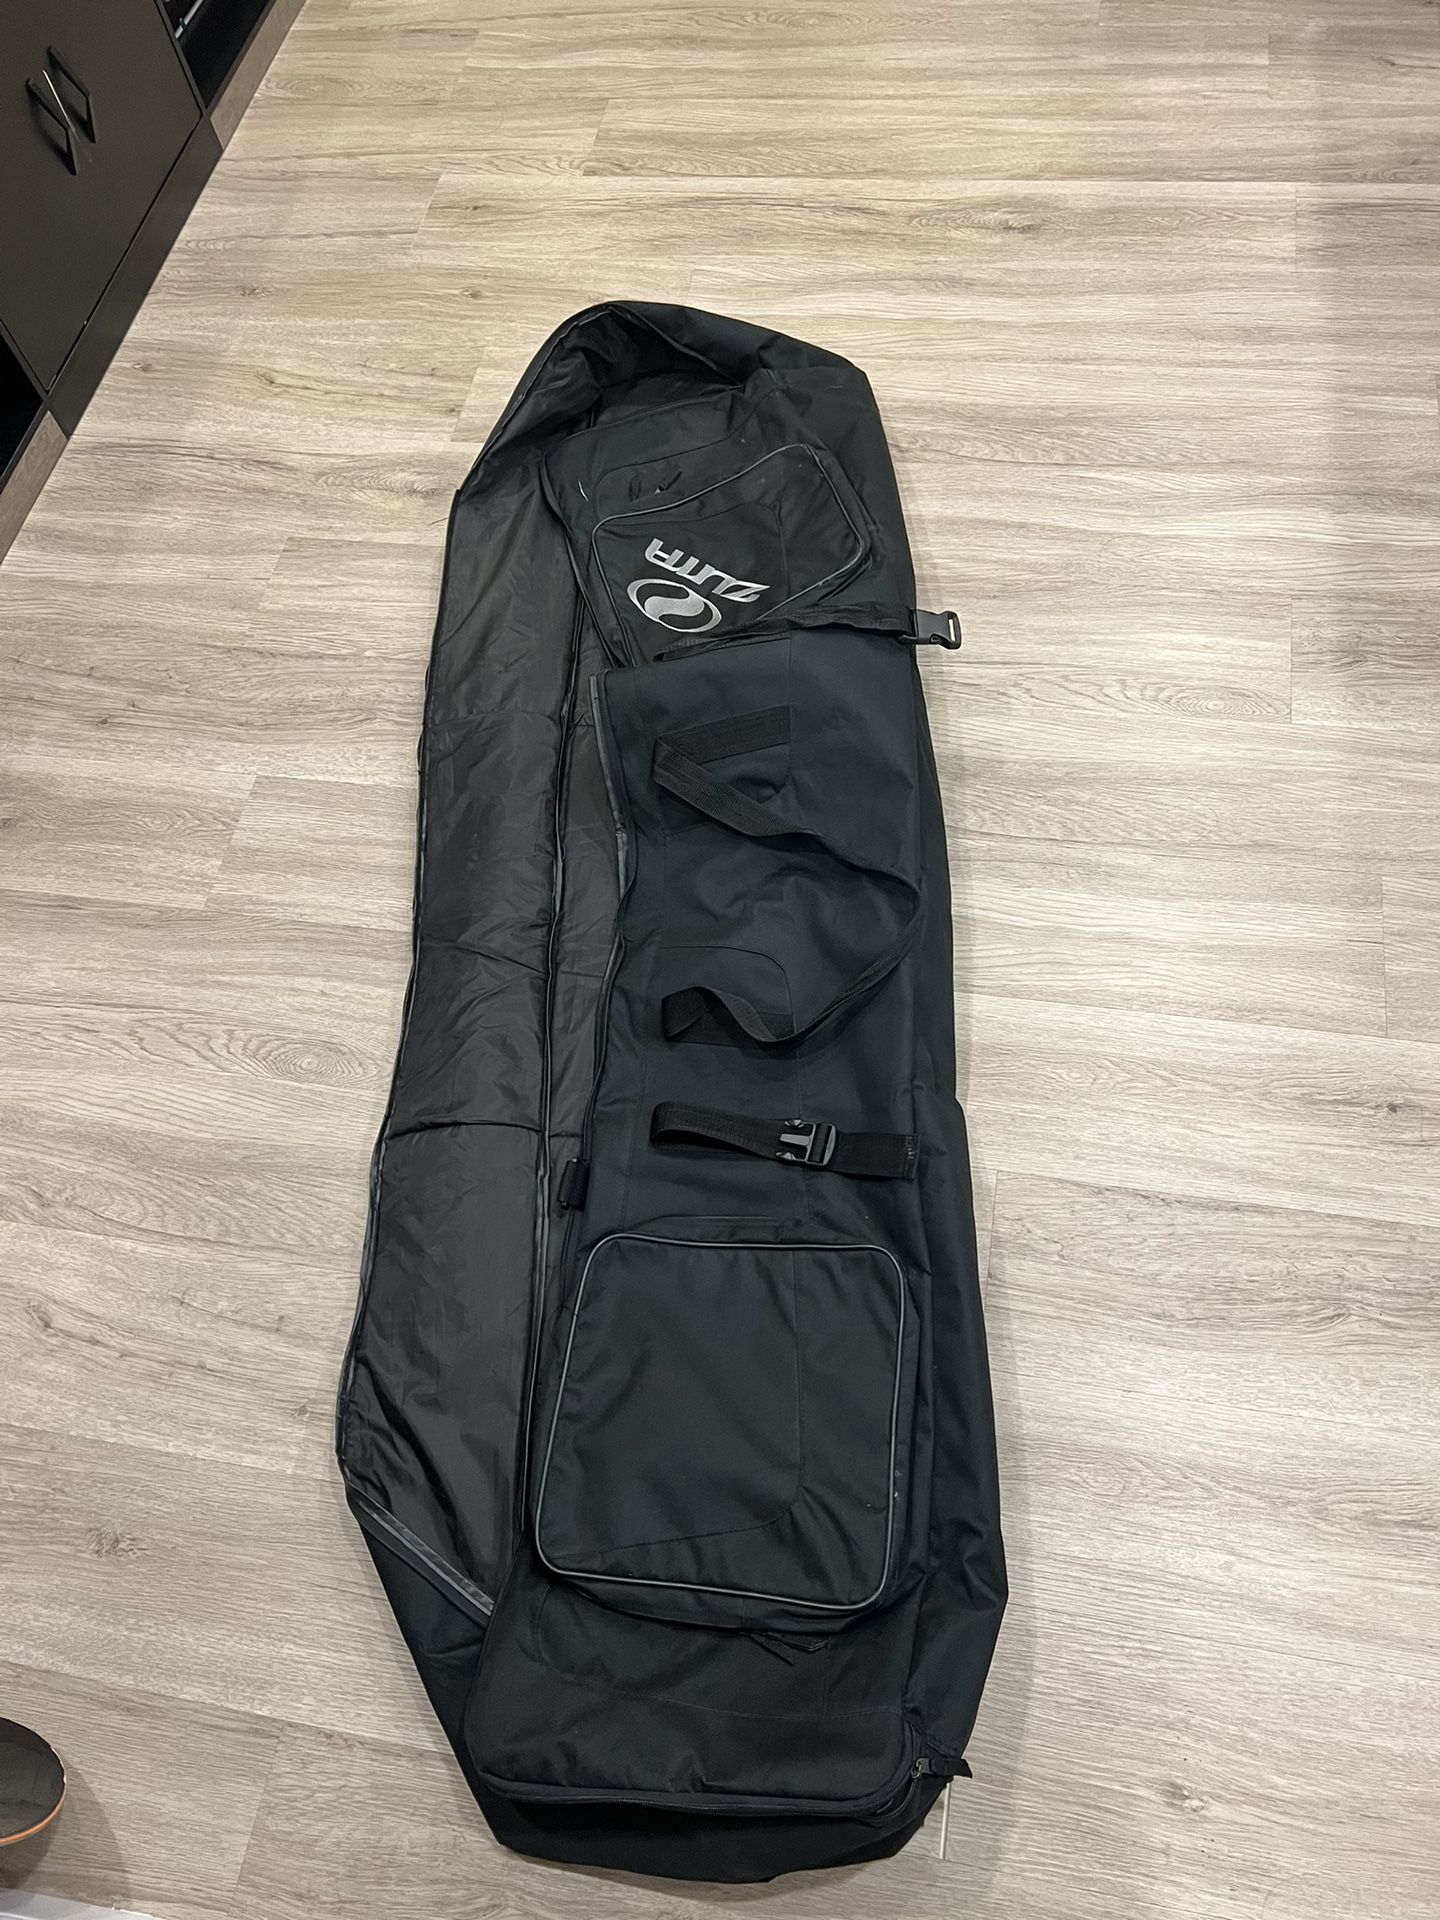 Snowboard Bag With 165cm